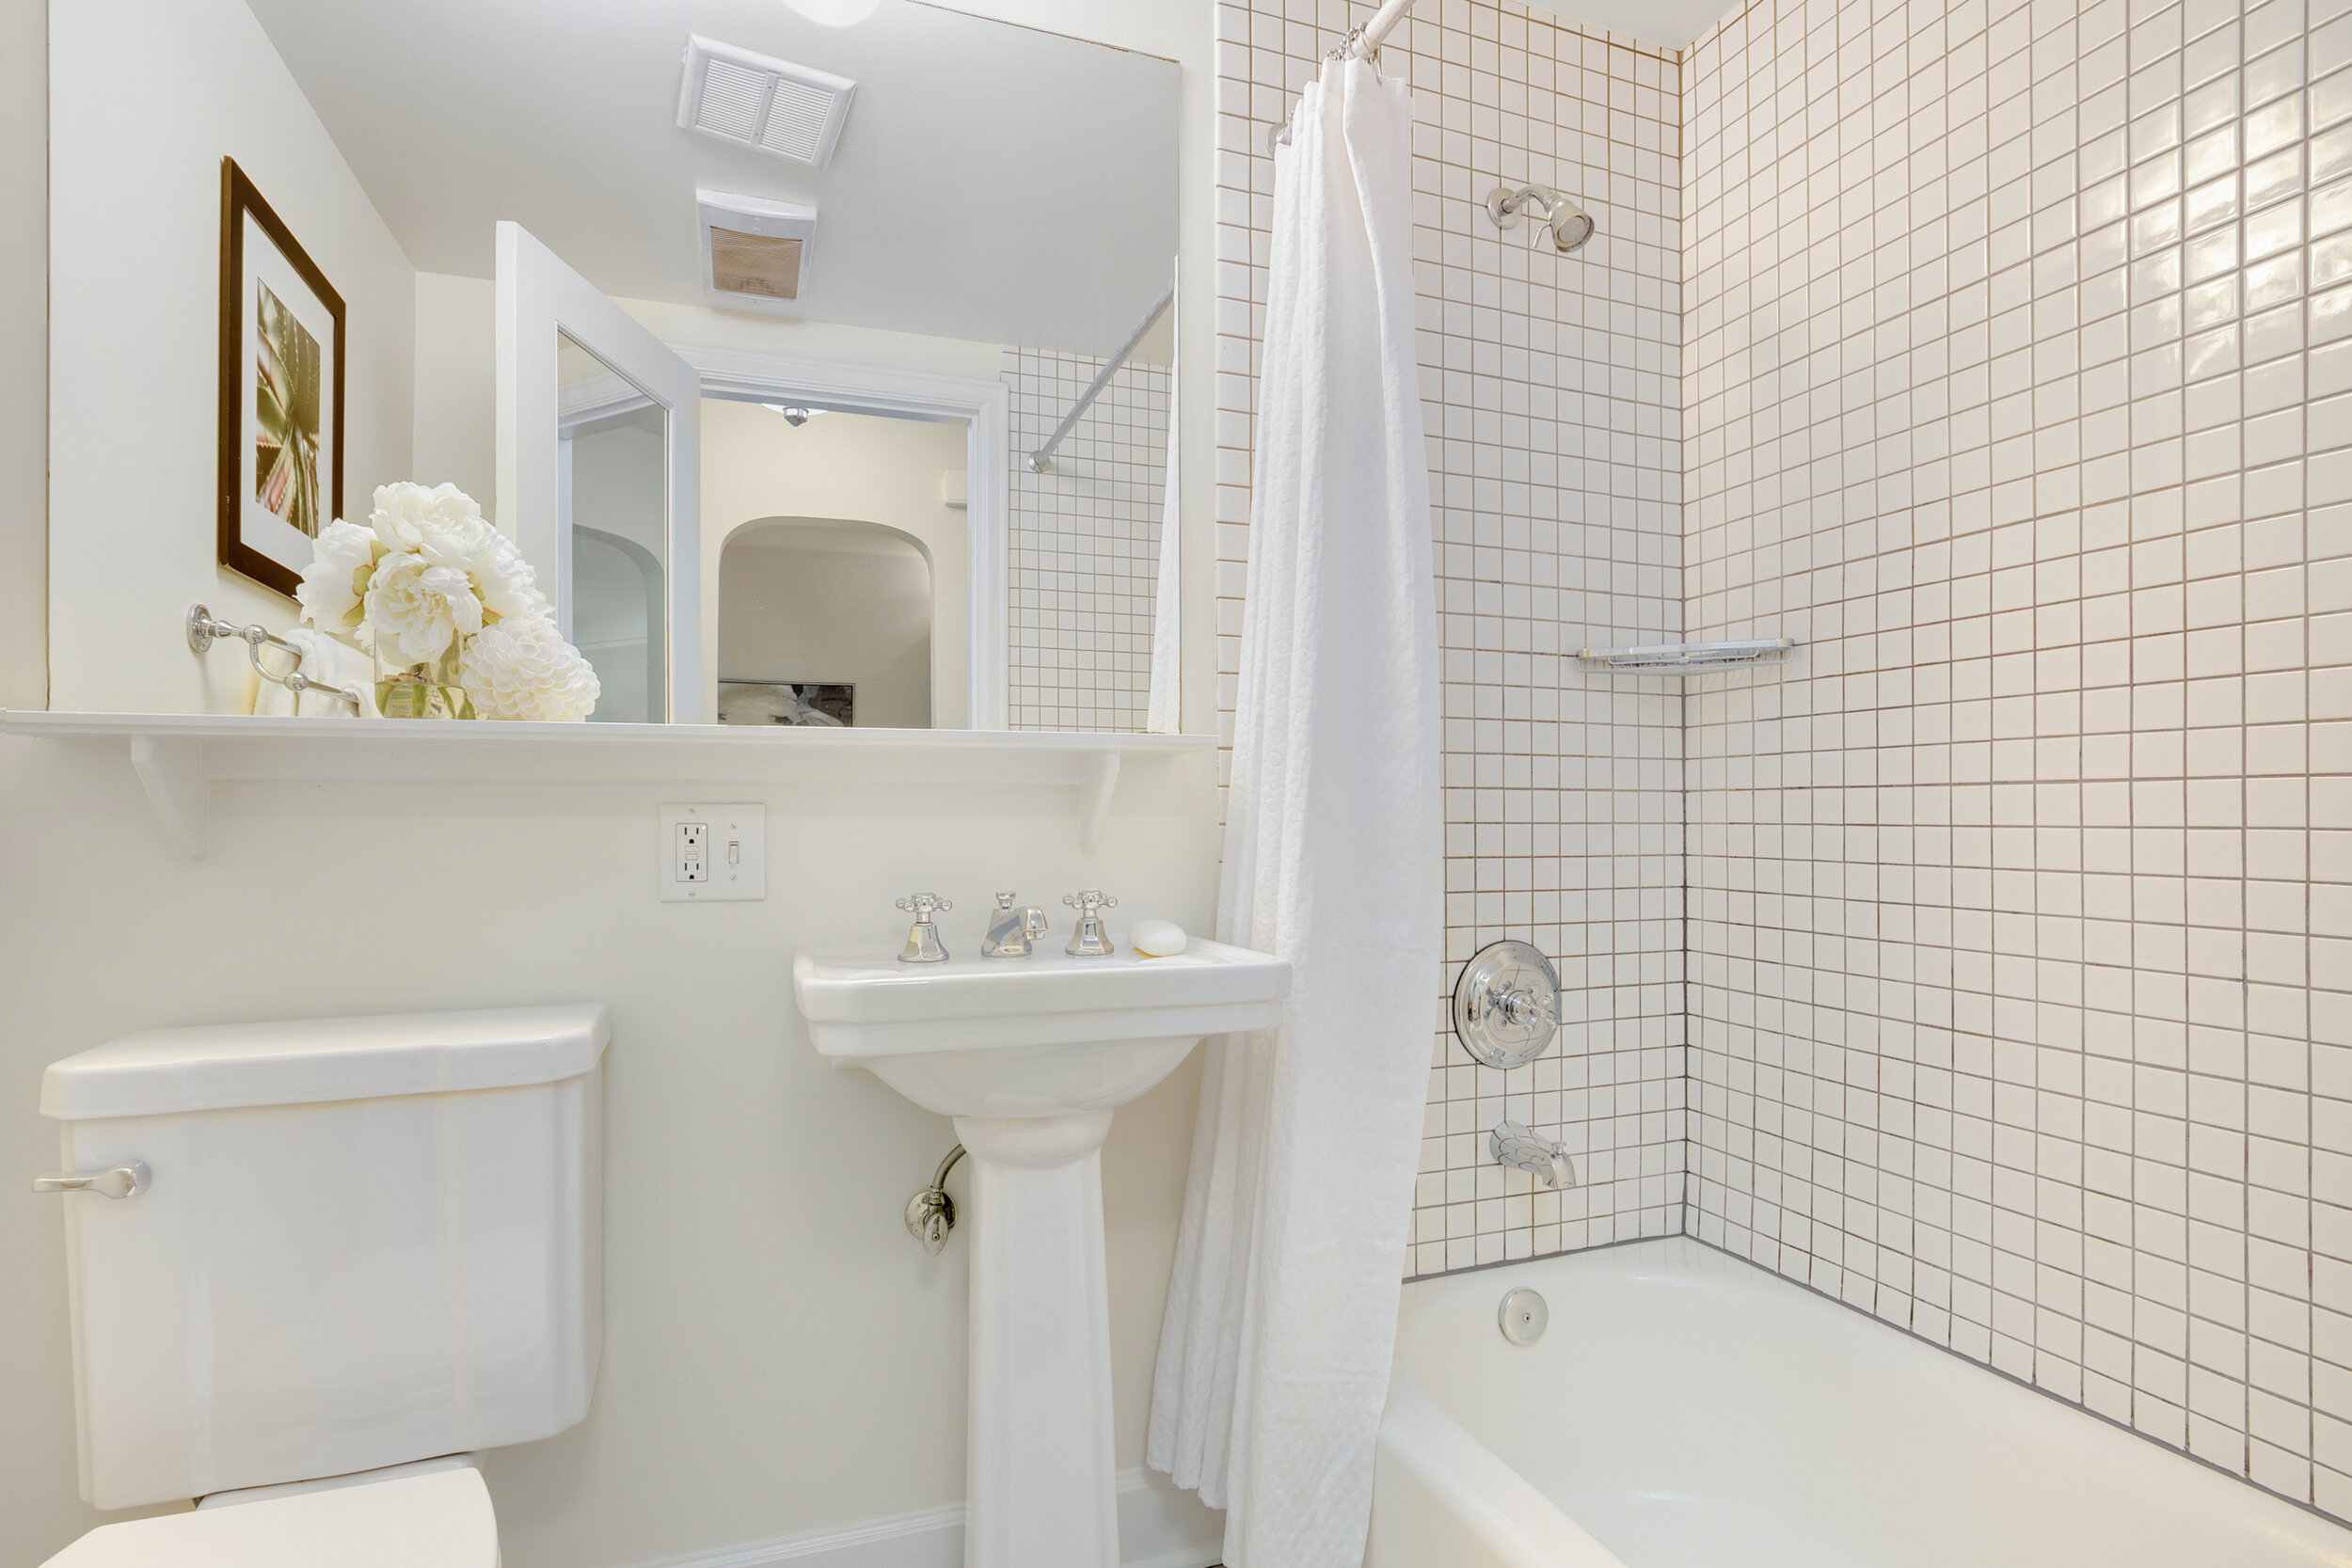  image description: interior of all white bathroom with shower and bathtub combo 